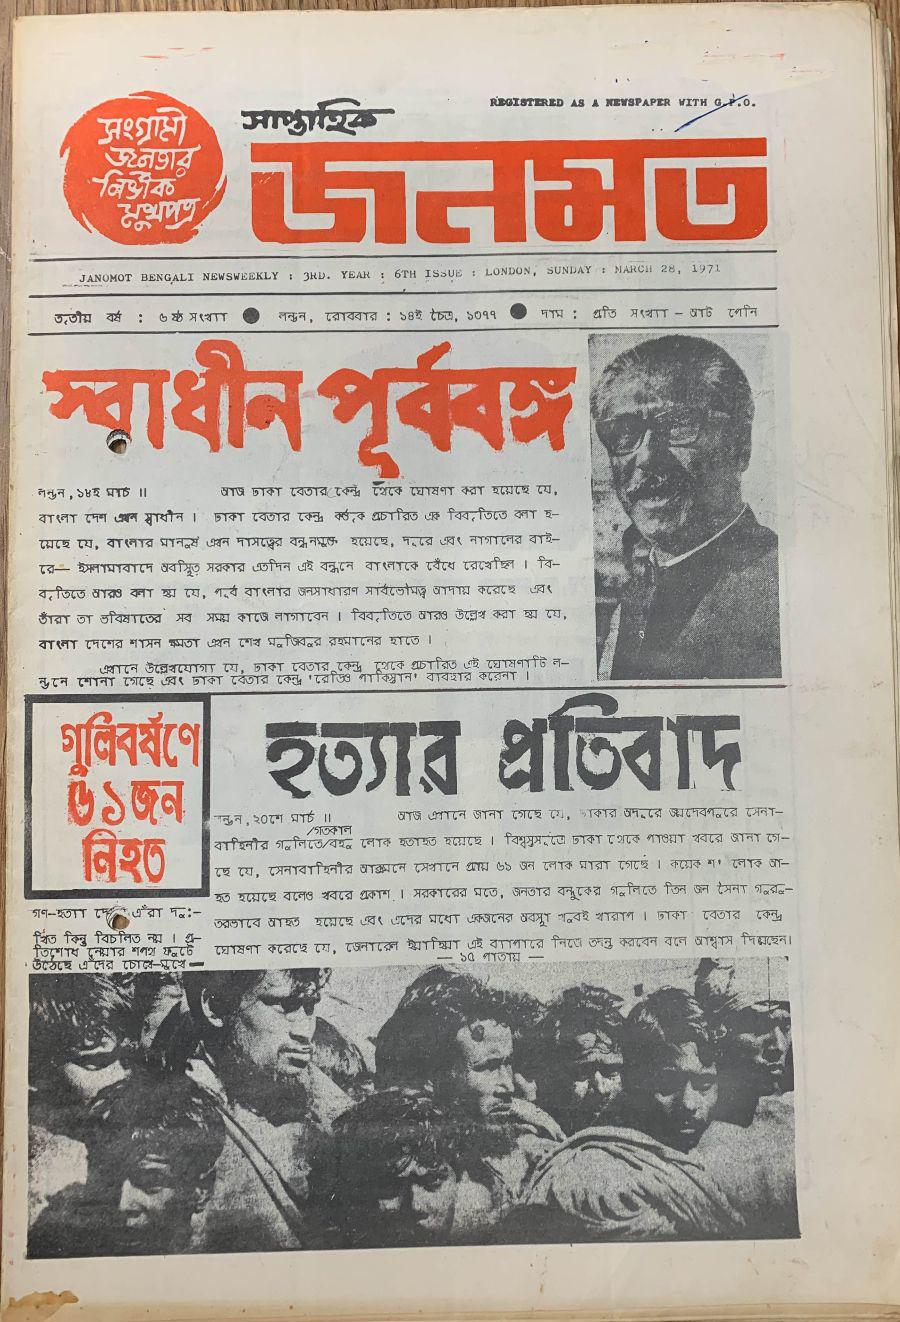 JANOMOT 28 March 1971: Independent East Bengal ... a call for freedom. Protests against killings of citizens in East Bengal.